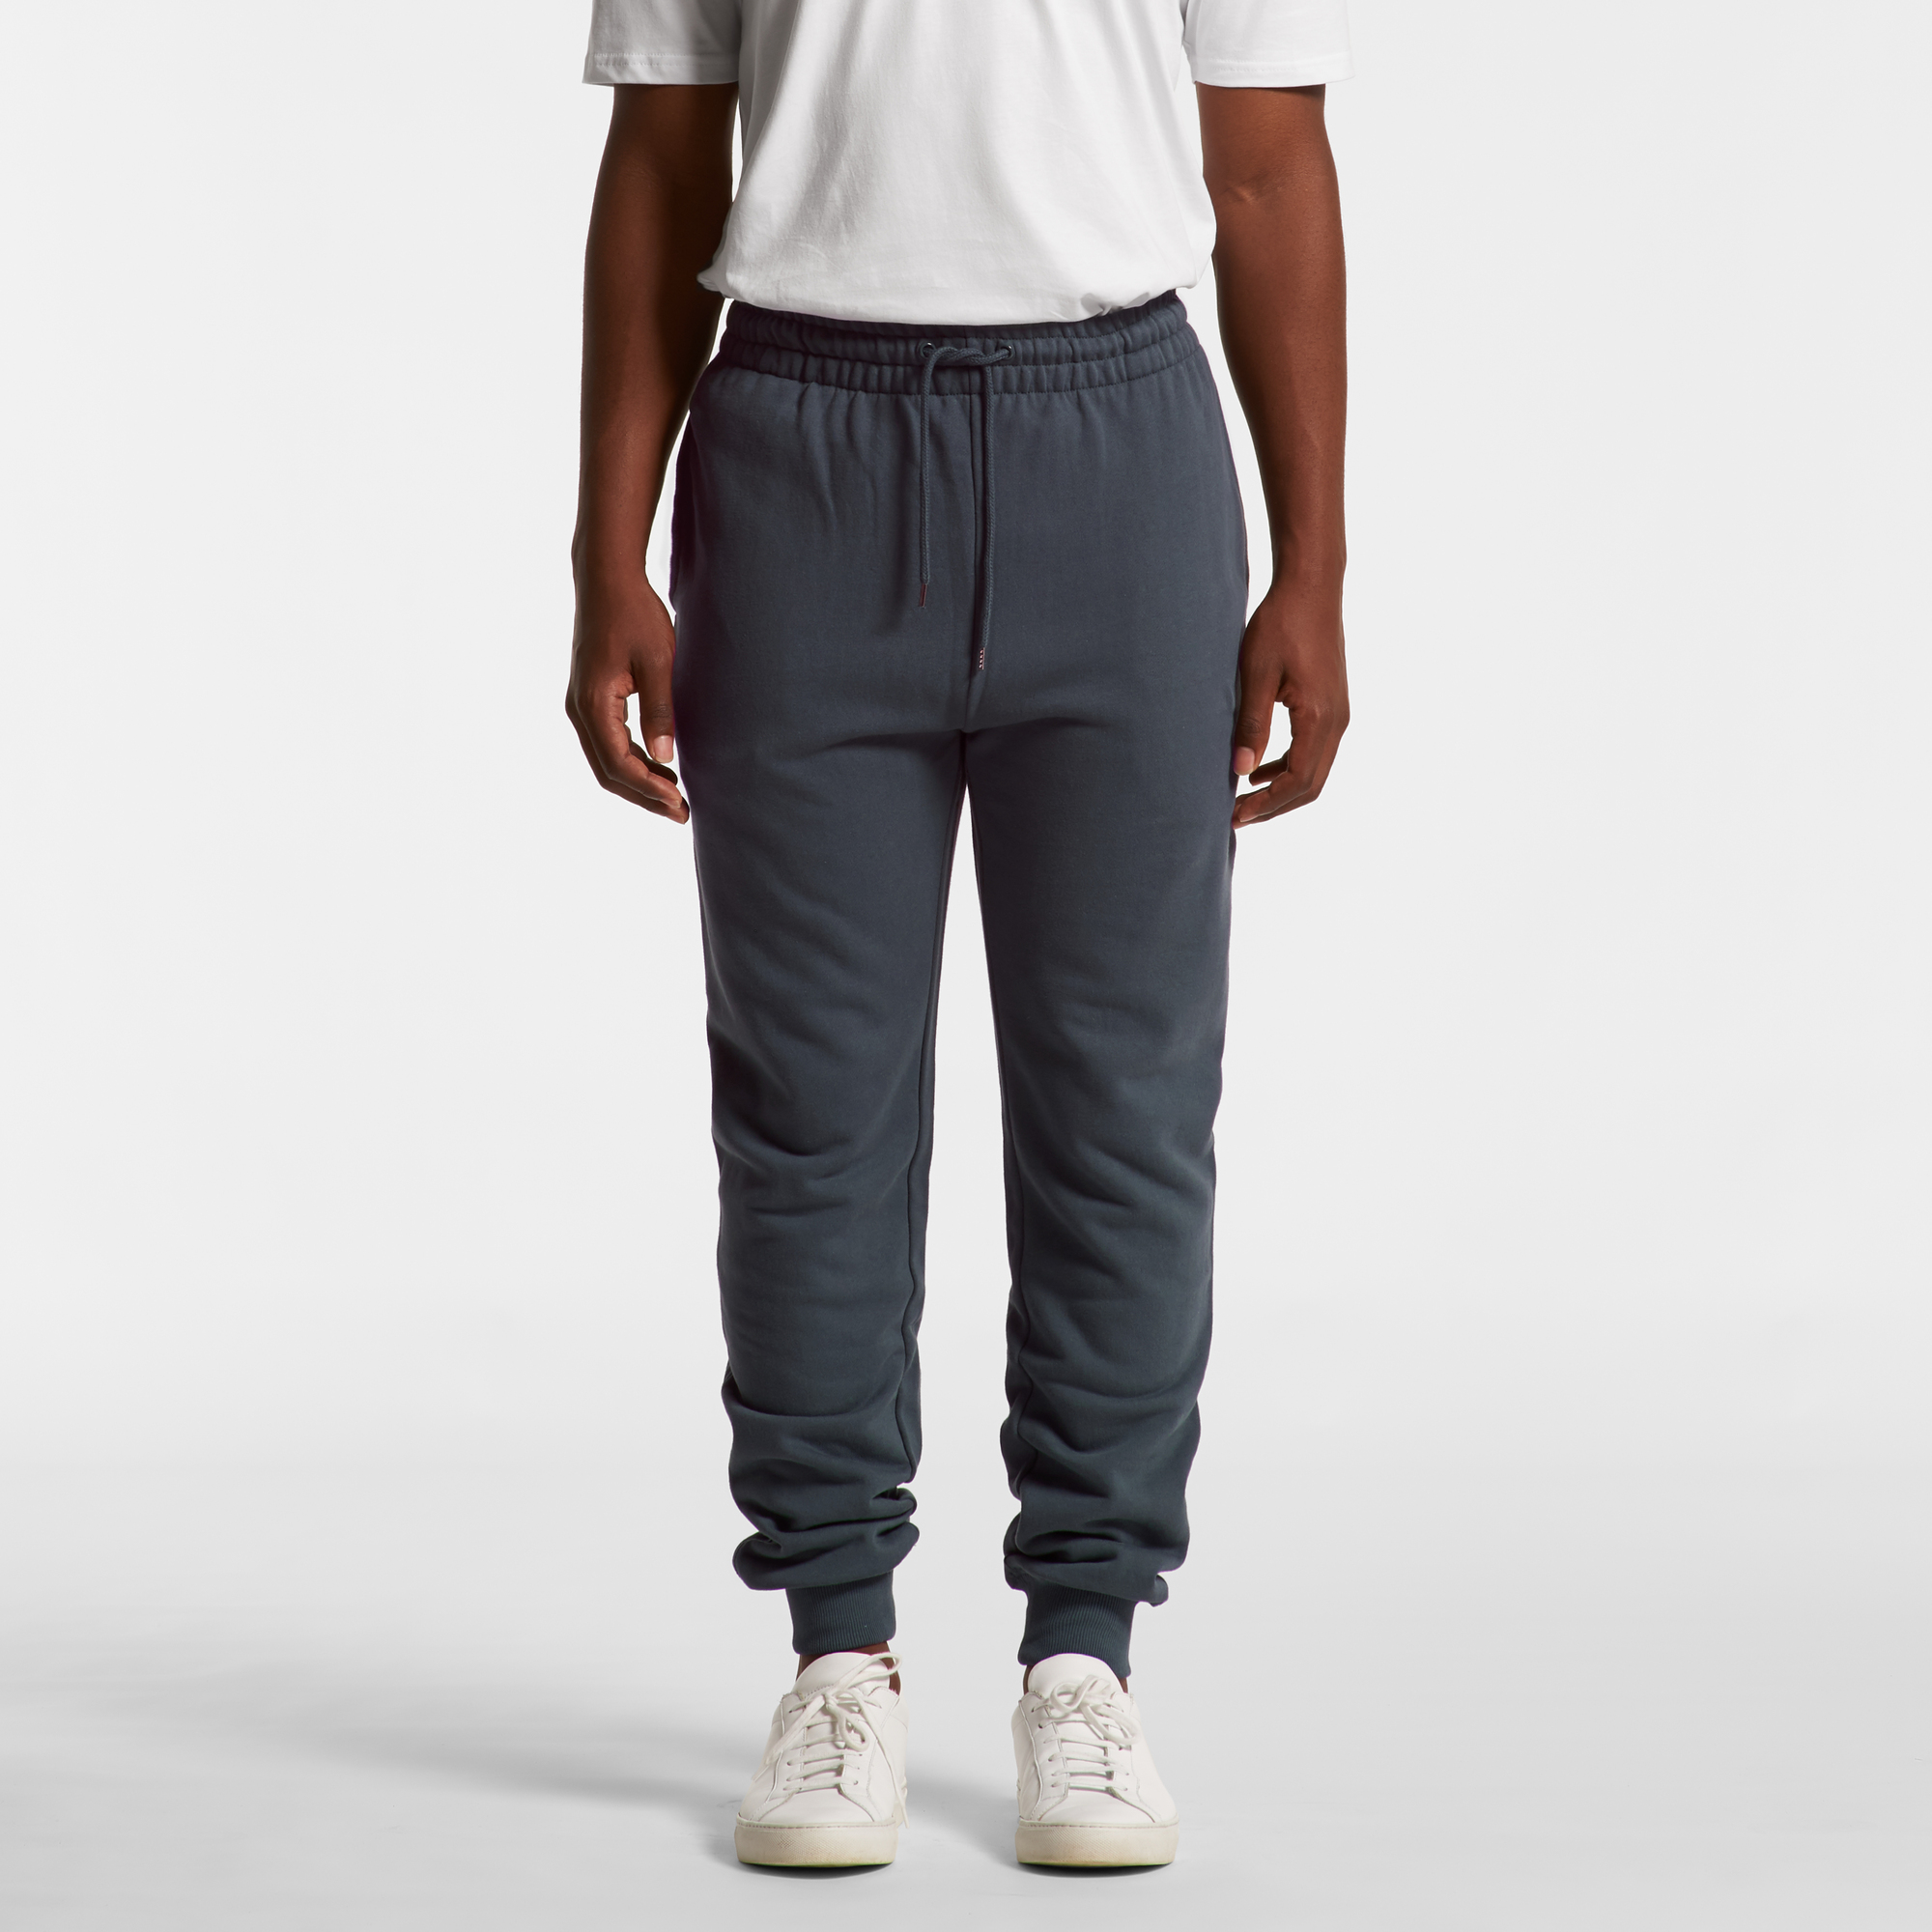 Men's Premium Track Pants | Branded Track Pants | Printed Track Pants NZ | AS Colour | Withers & Co